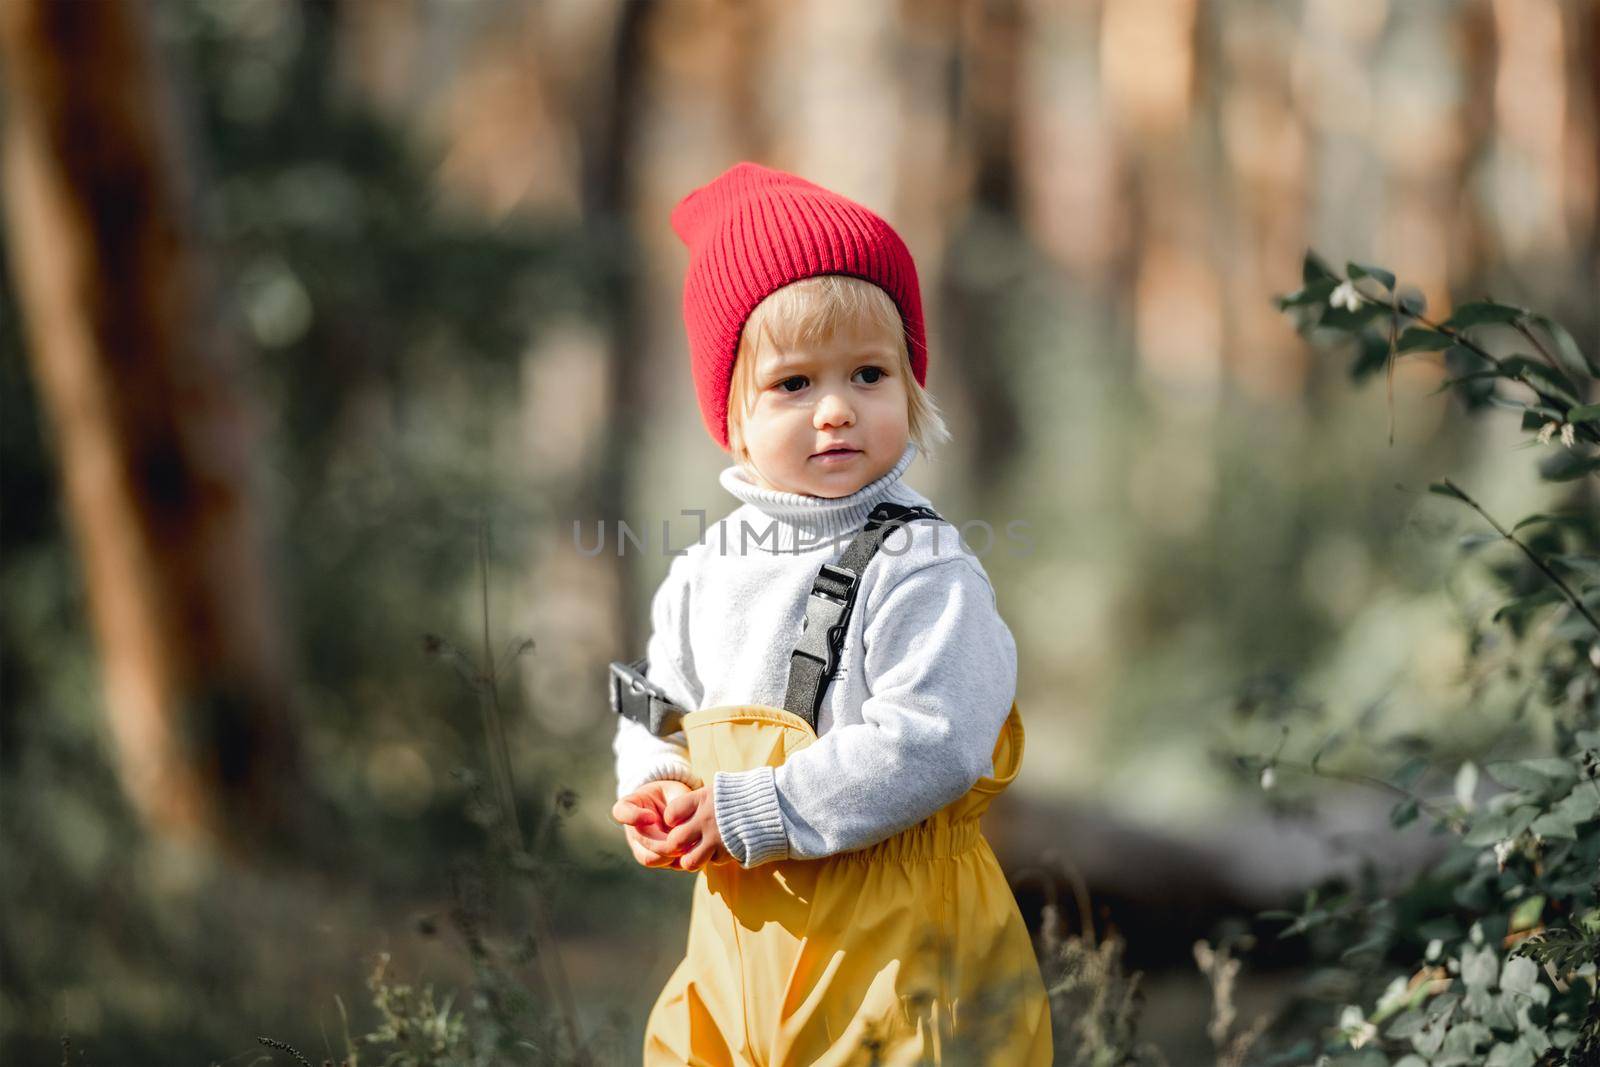 Little cute child girl portrait in the autumn forest. Cute female kid wearing red hat at nature outdoors